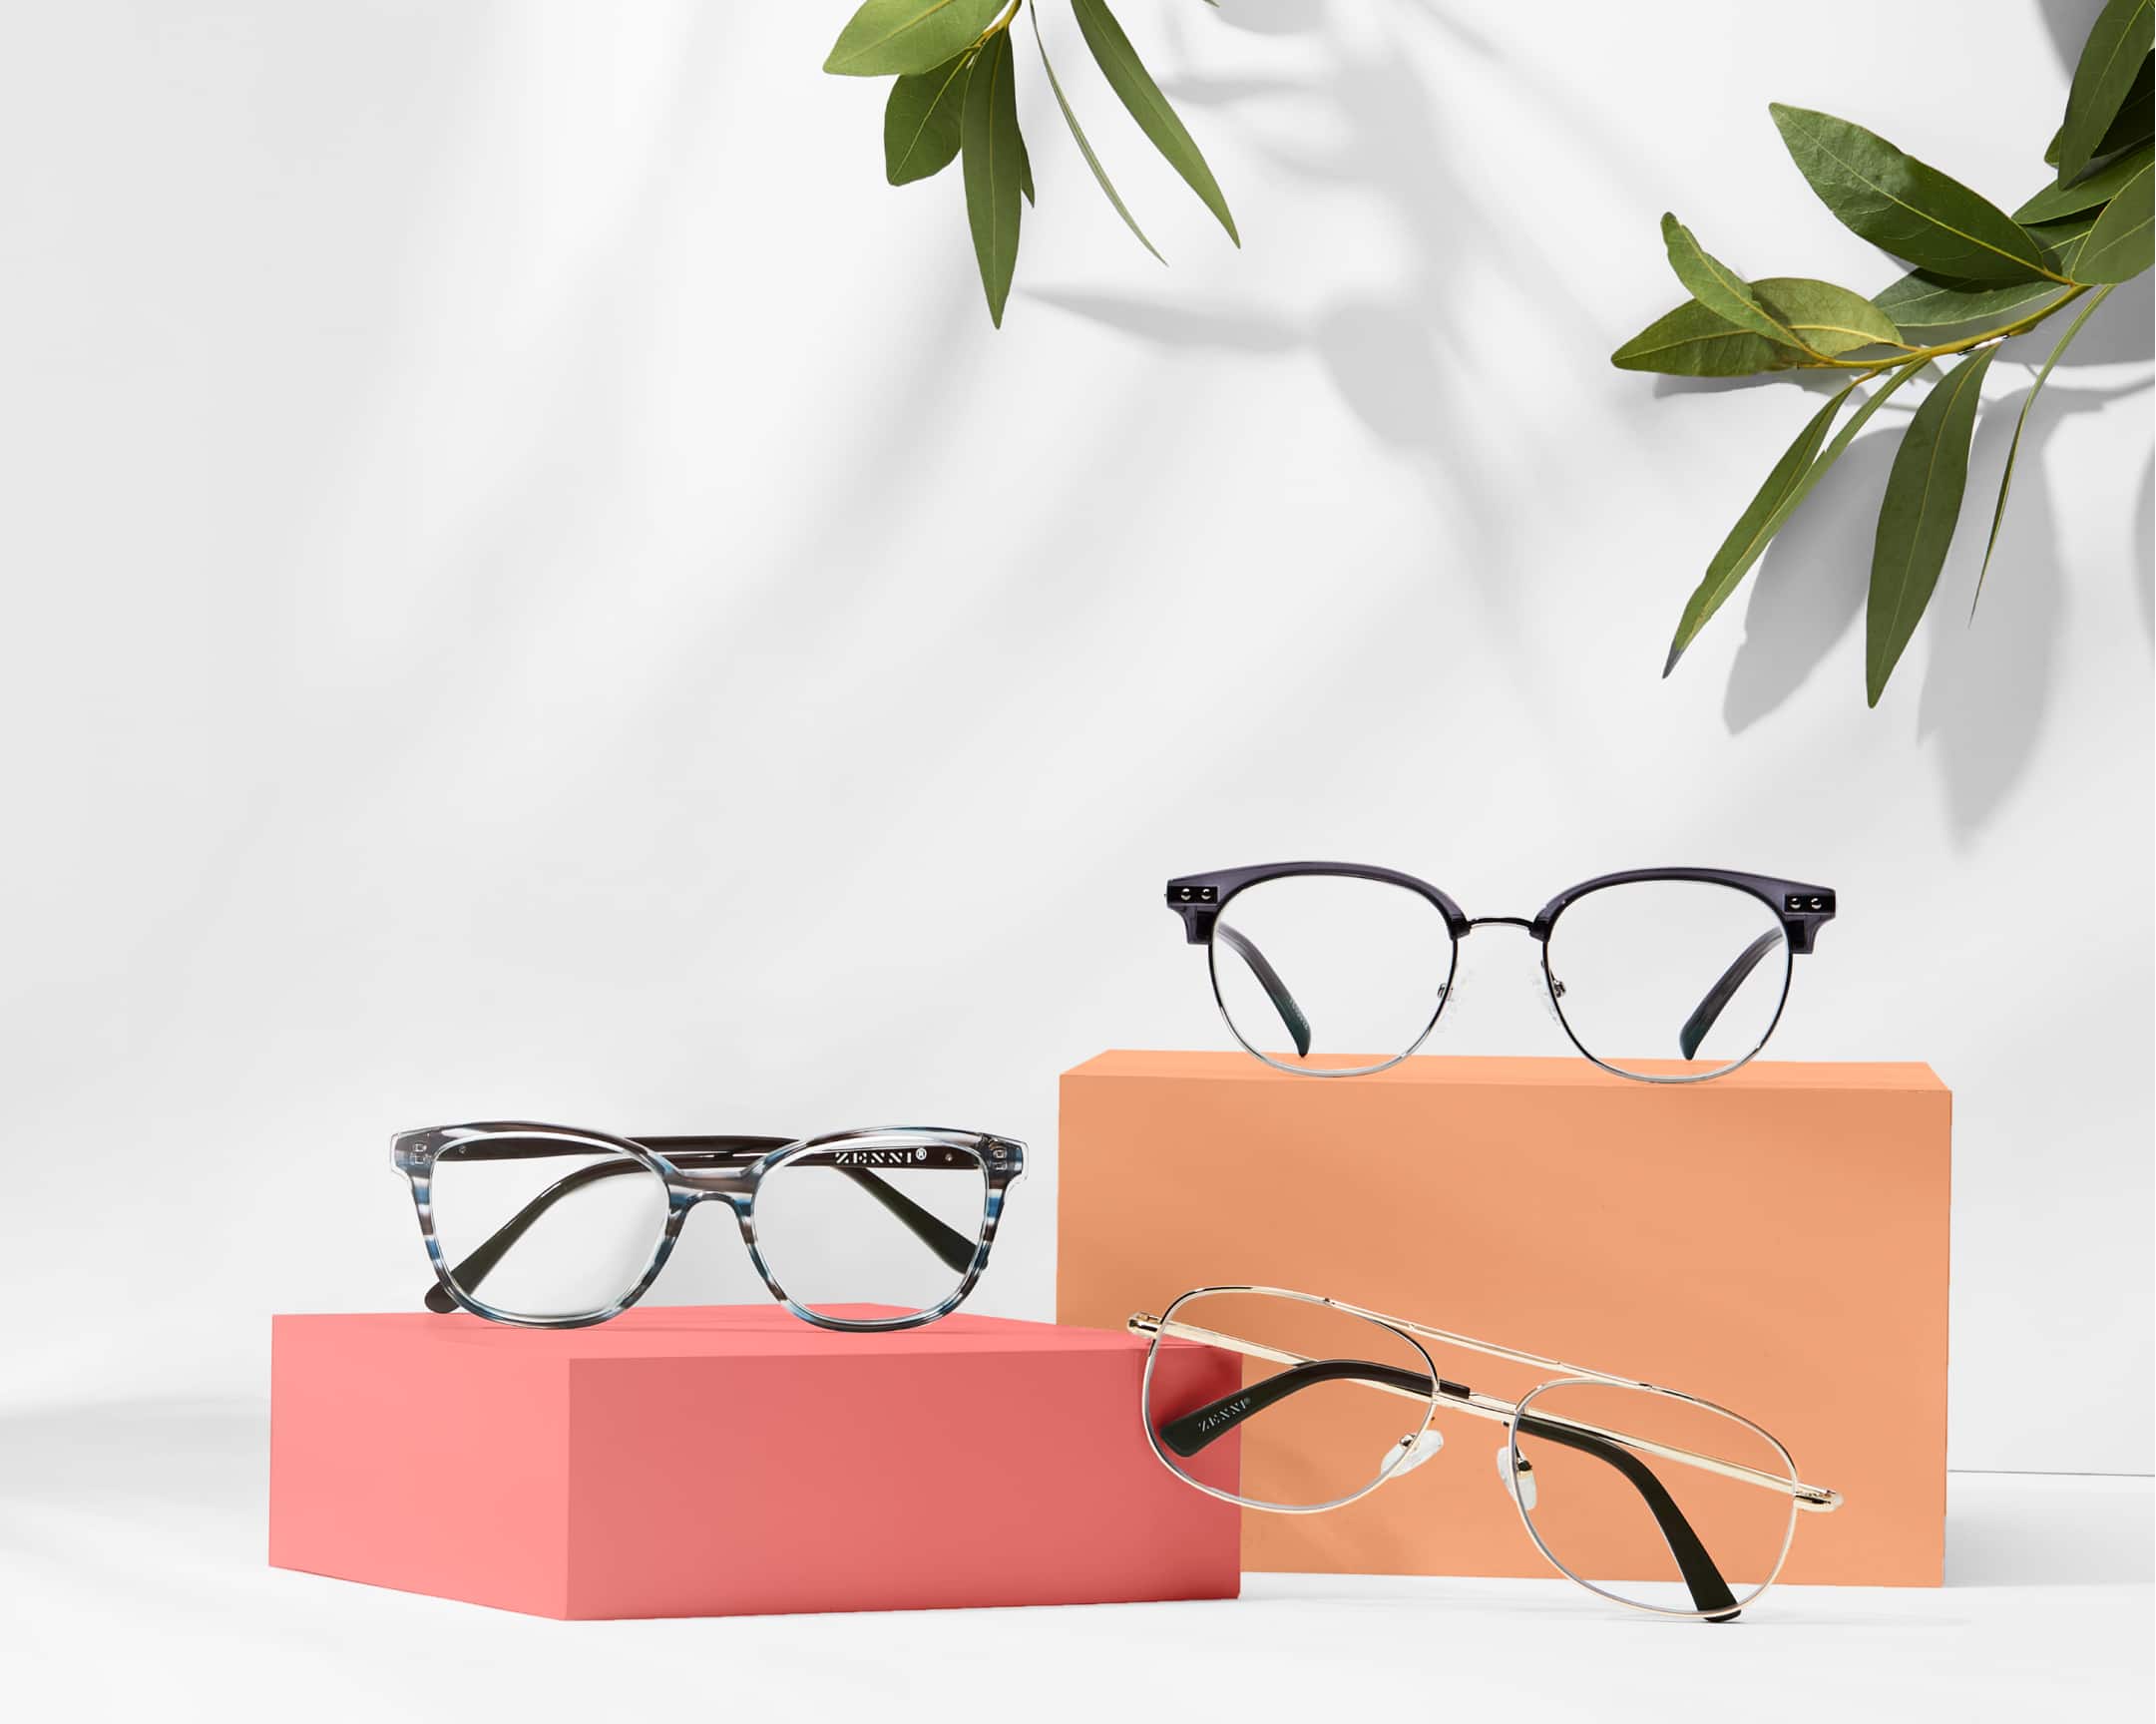 White background and orange risers with 3 prescription glasses under $30: dark grey browline glasses, blue and gray striped rectangle glasses, and gold aviators.